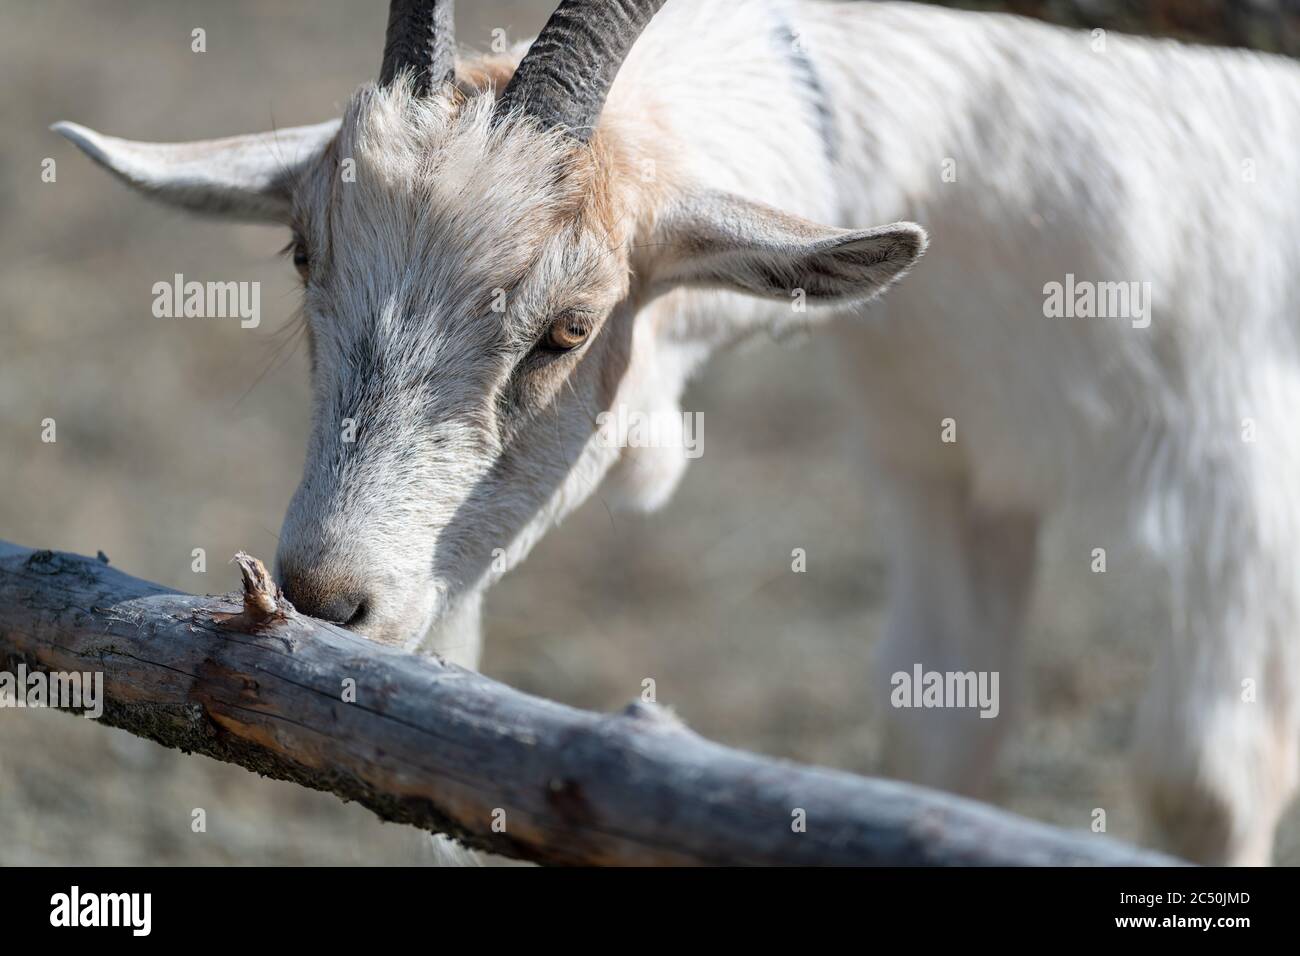 A white hair domestic goat with large ears, black narrow horns and a long  snout grazing on a wooden fence in a farm's field Stock Photo - Alamy